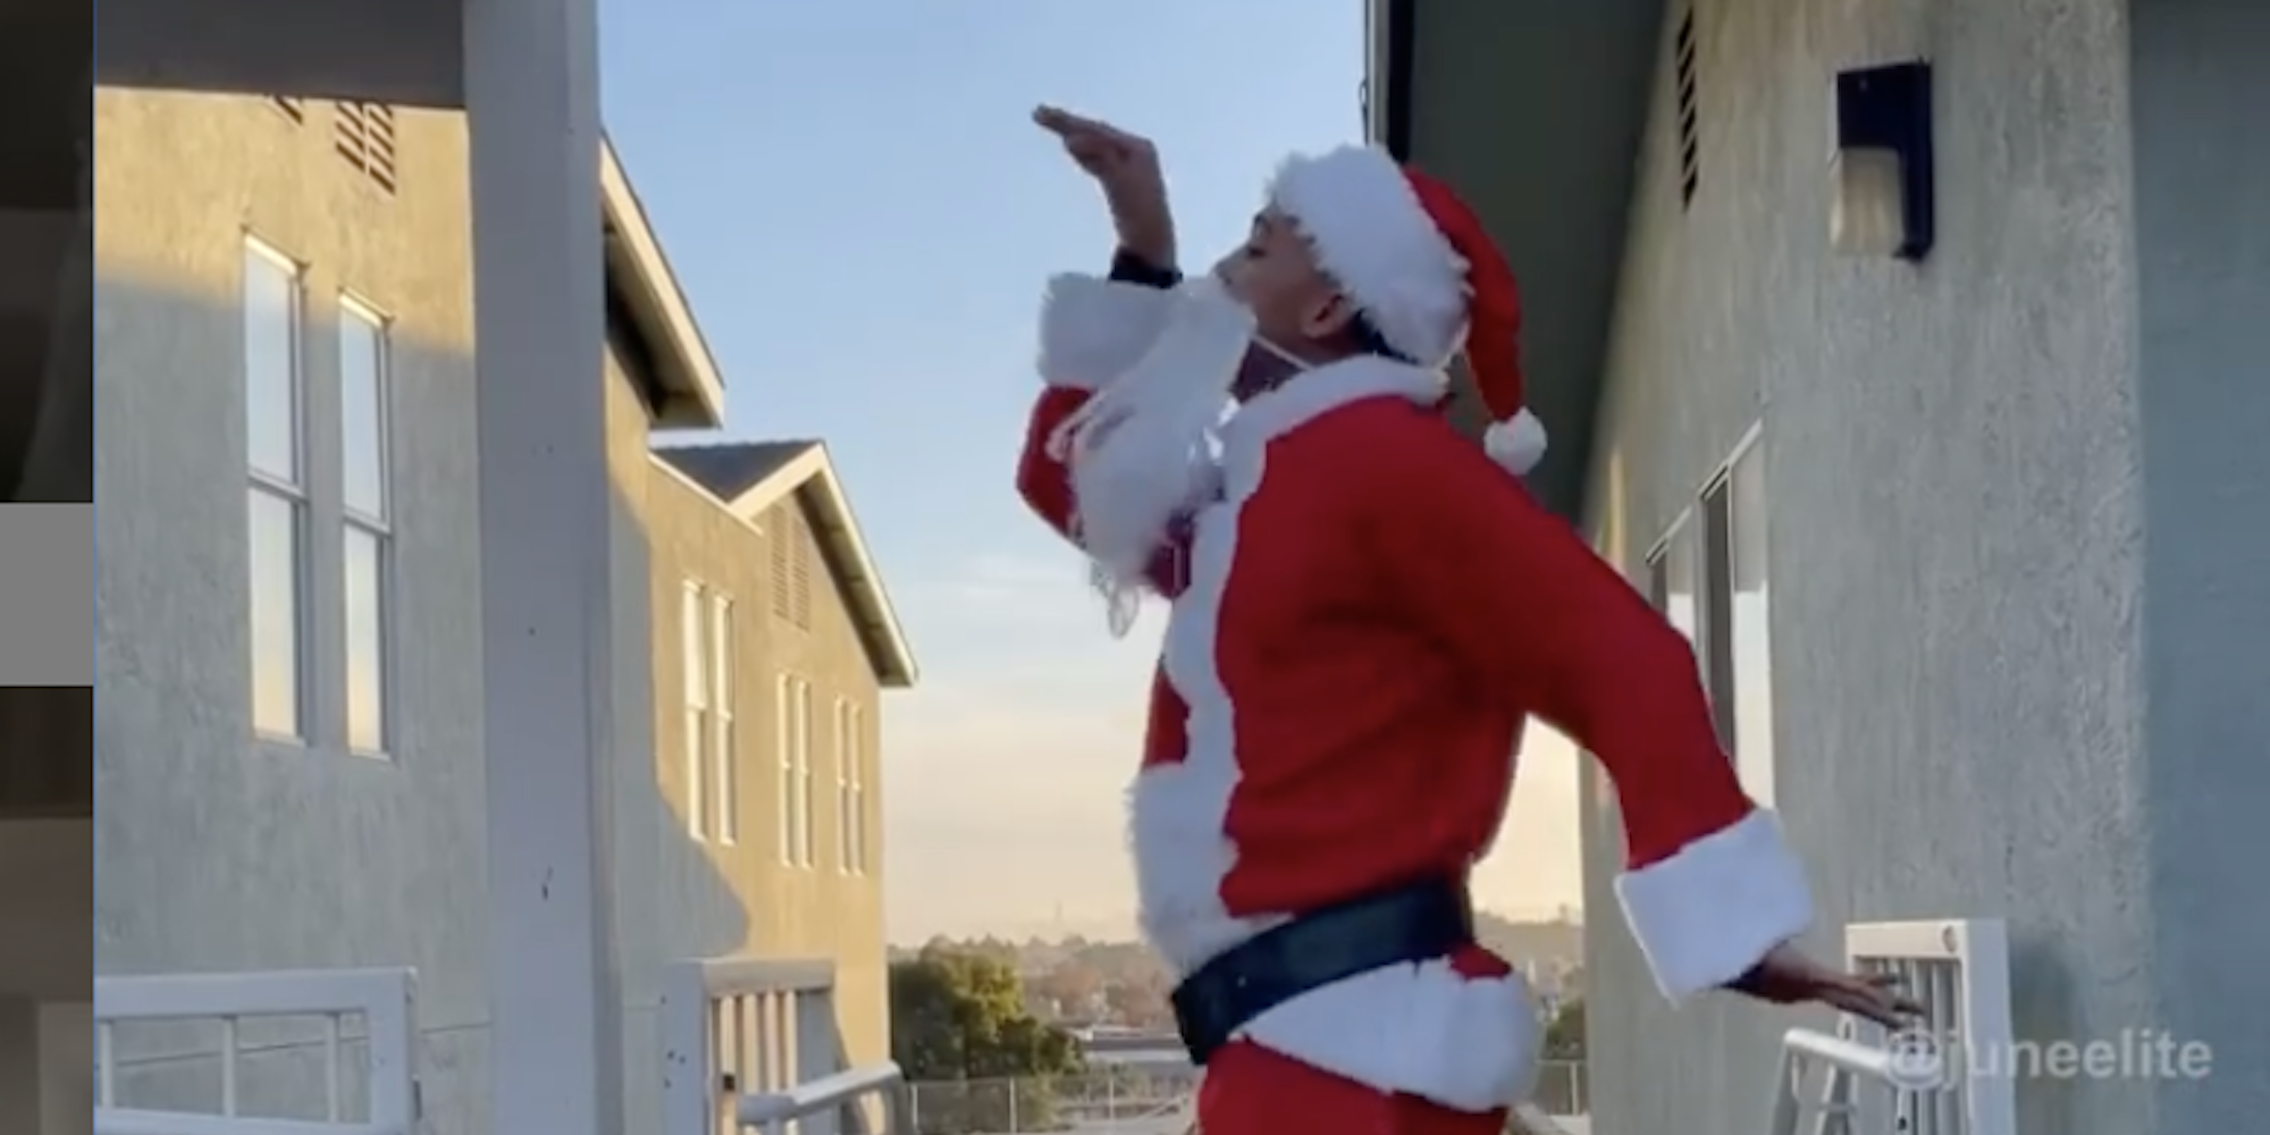 A Black man in a Santa suit and beard does the Junebug Challenge dance in an alley between houses